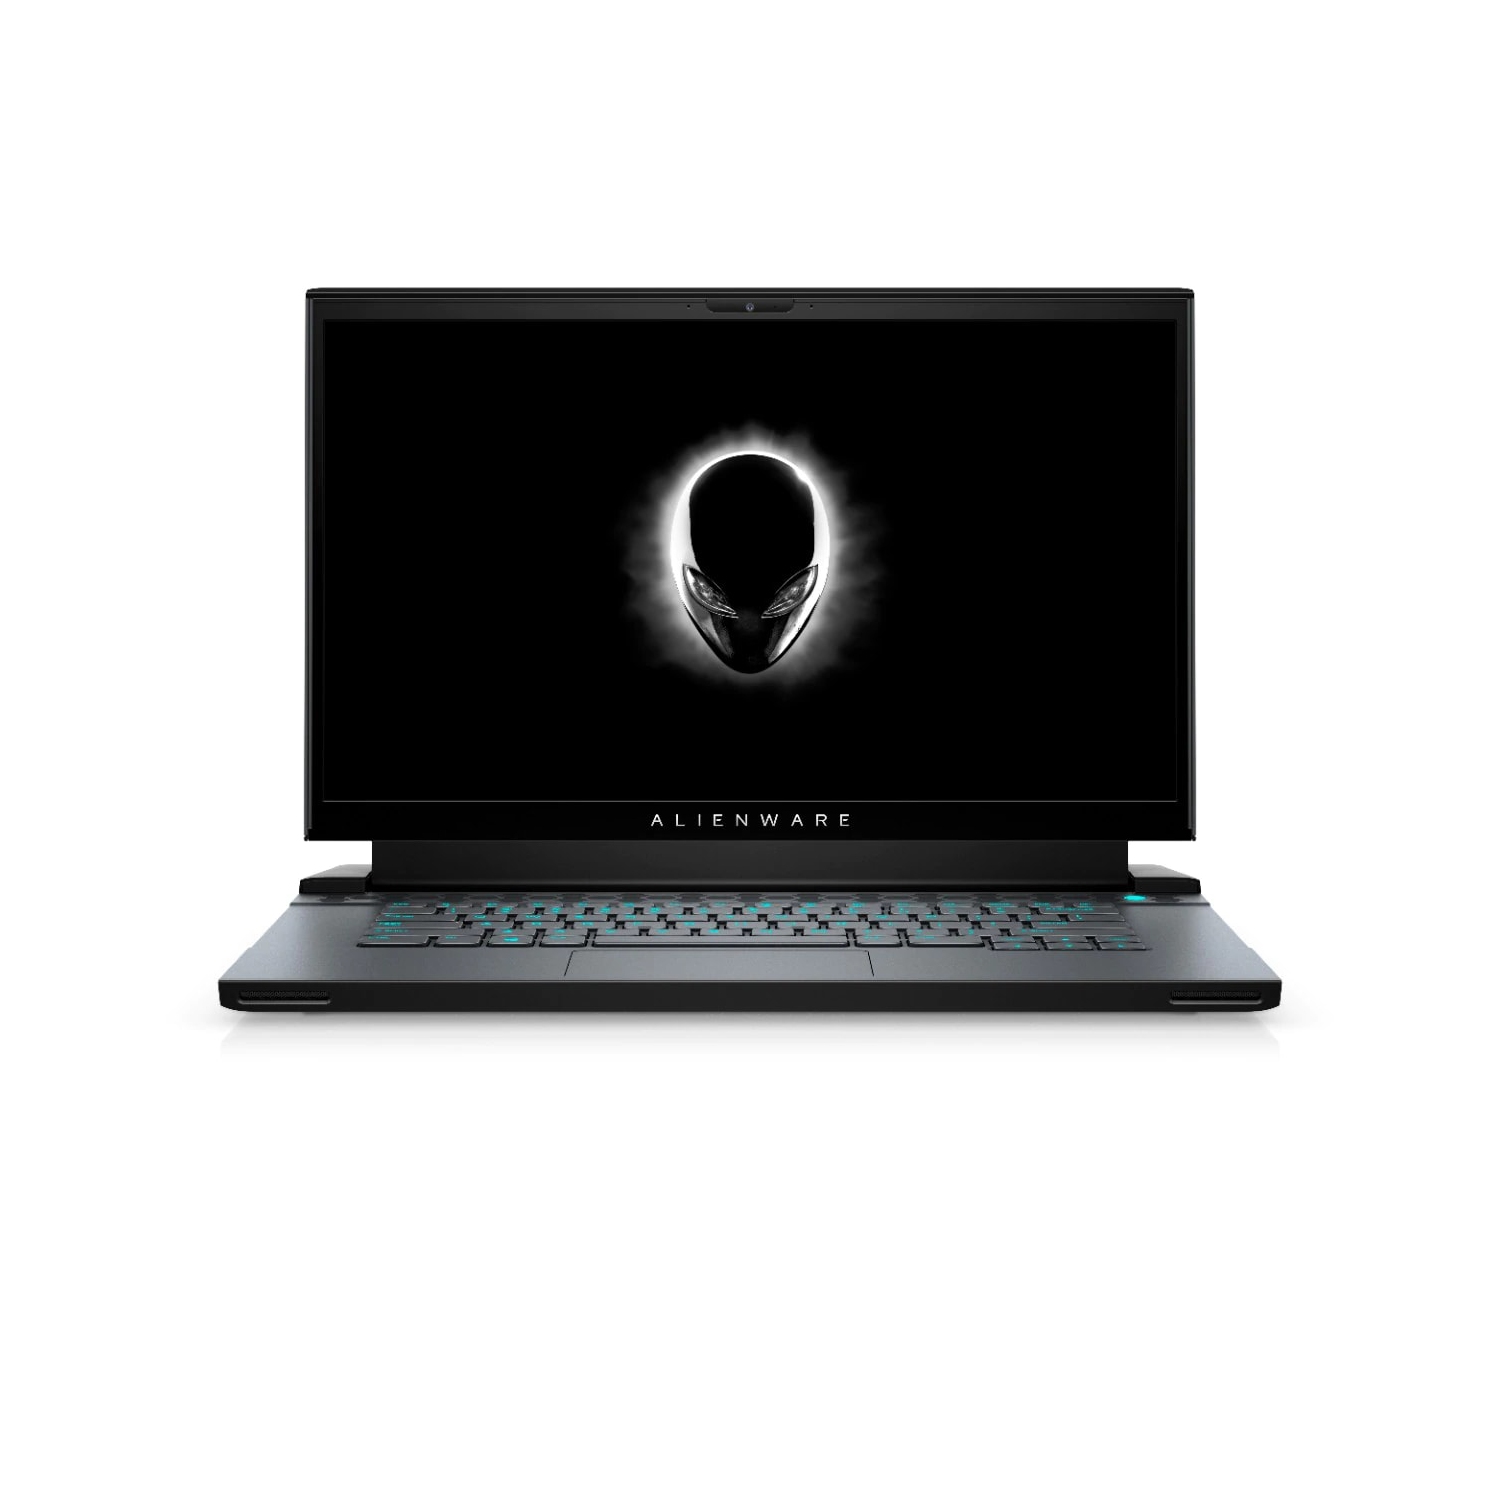 Refurbished (Excellent) - Dell Alienware m15 R4 Gaming Laptop (2021), 15.6" FHD, Core i7, 256GB SSD, 32GB RAM, RTX 3070, 8 Cores @ 5 GHz, 10th Gen CPU Certified